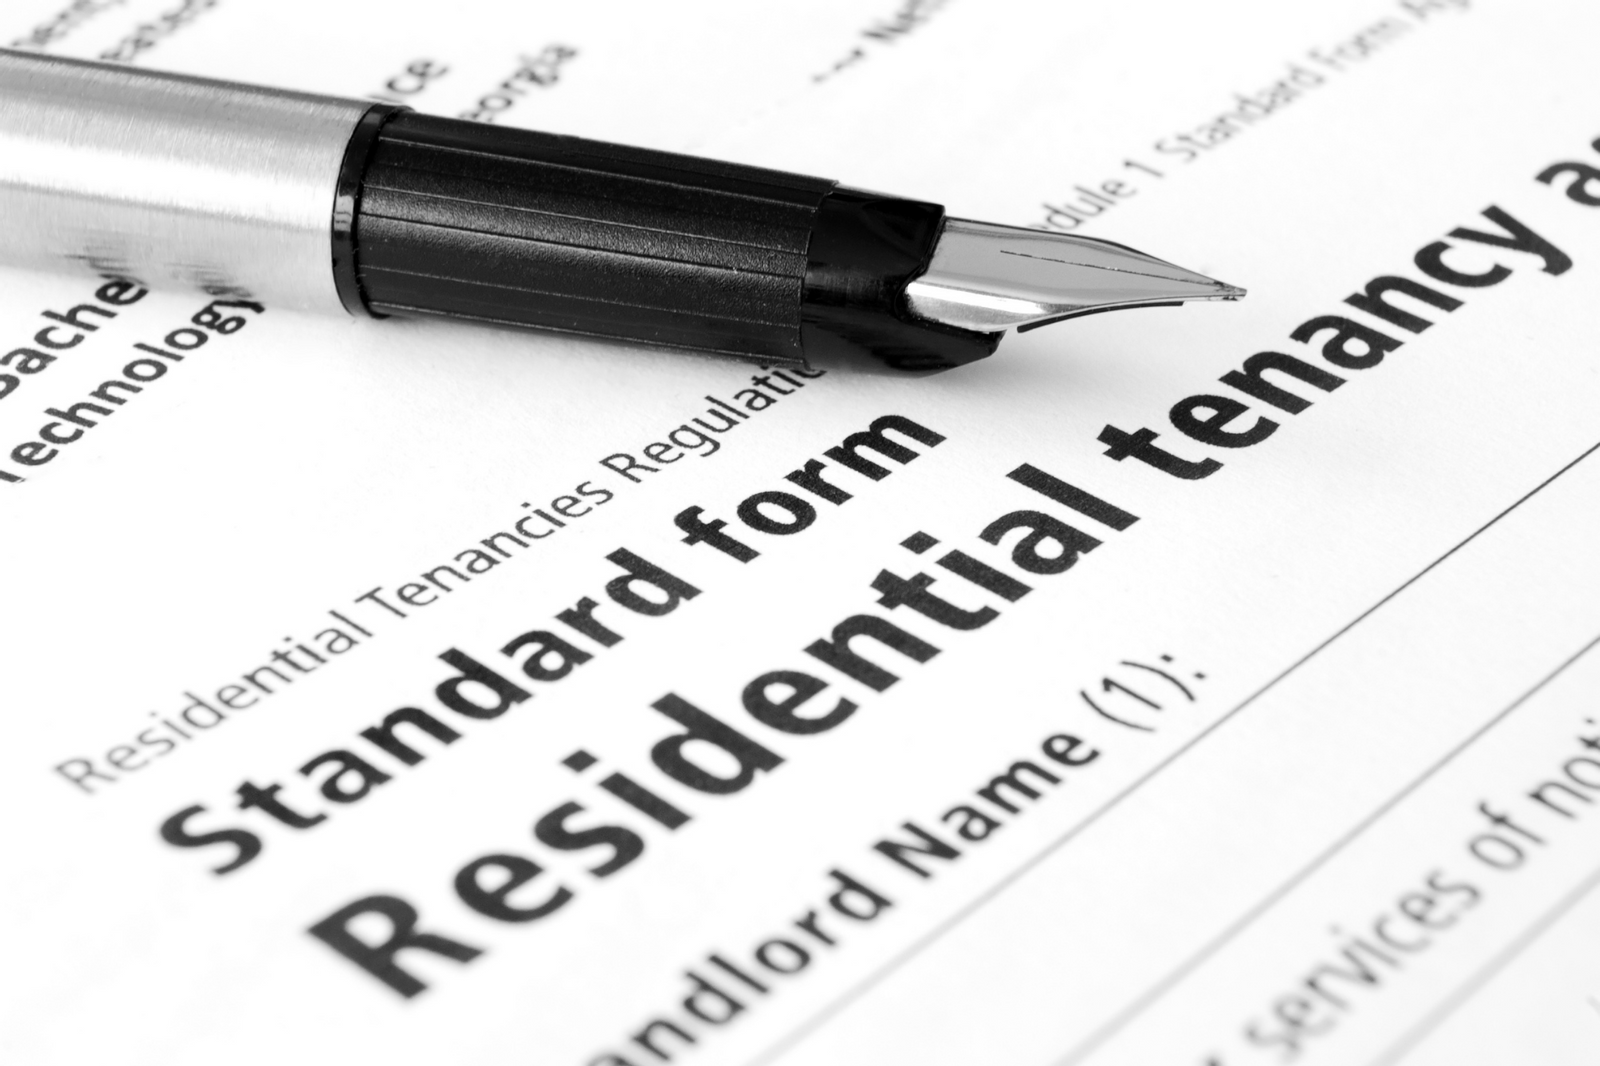 Landlords - Can I sell my Investment property if there is a tenant living there?